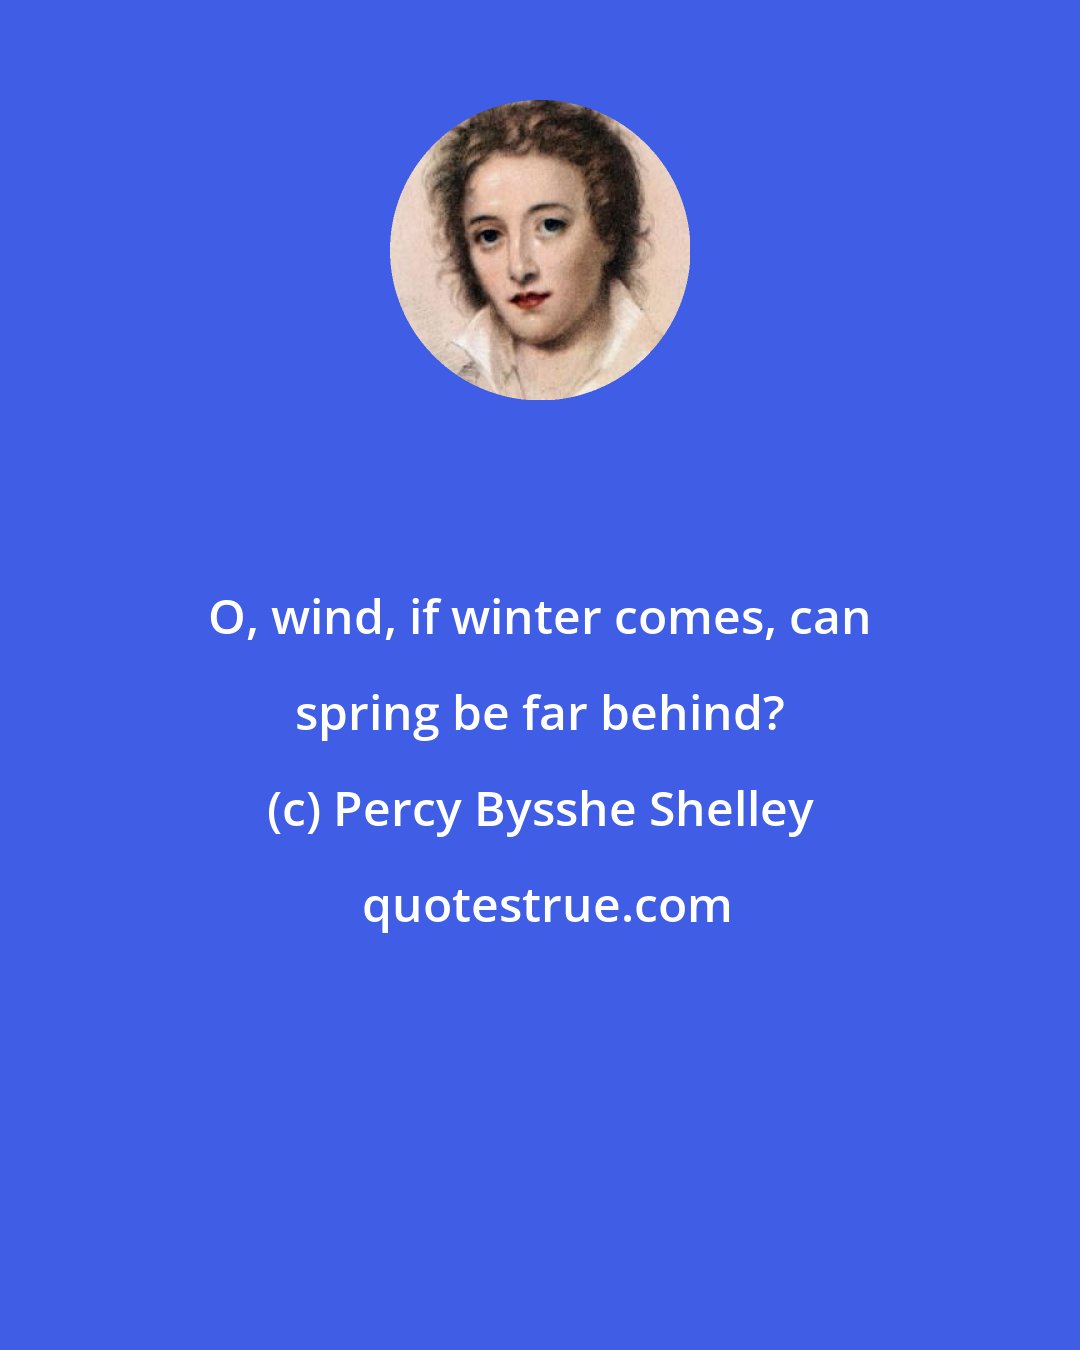 Percy Bysshe Shelley: O, wind, if winter comes, can spring be far behind?